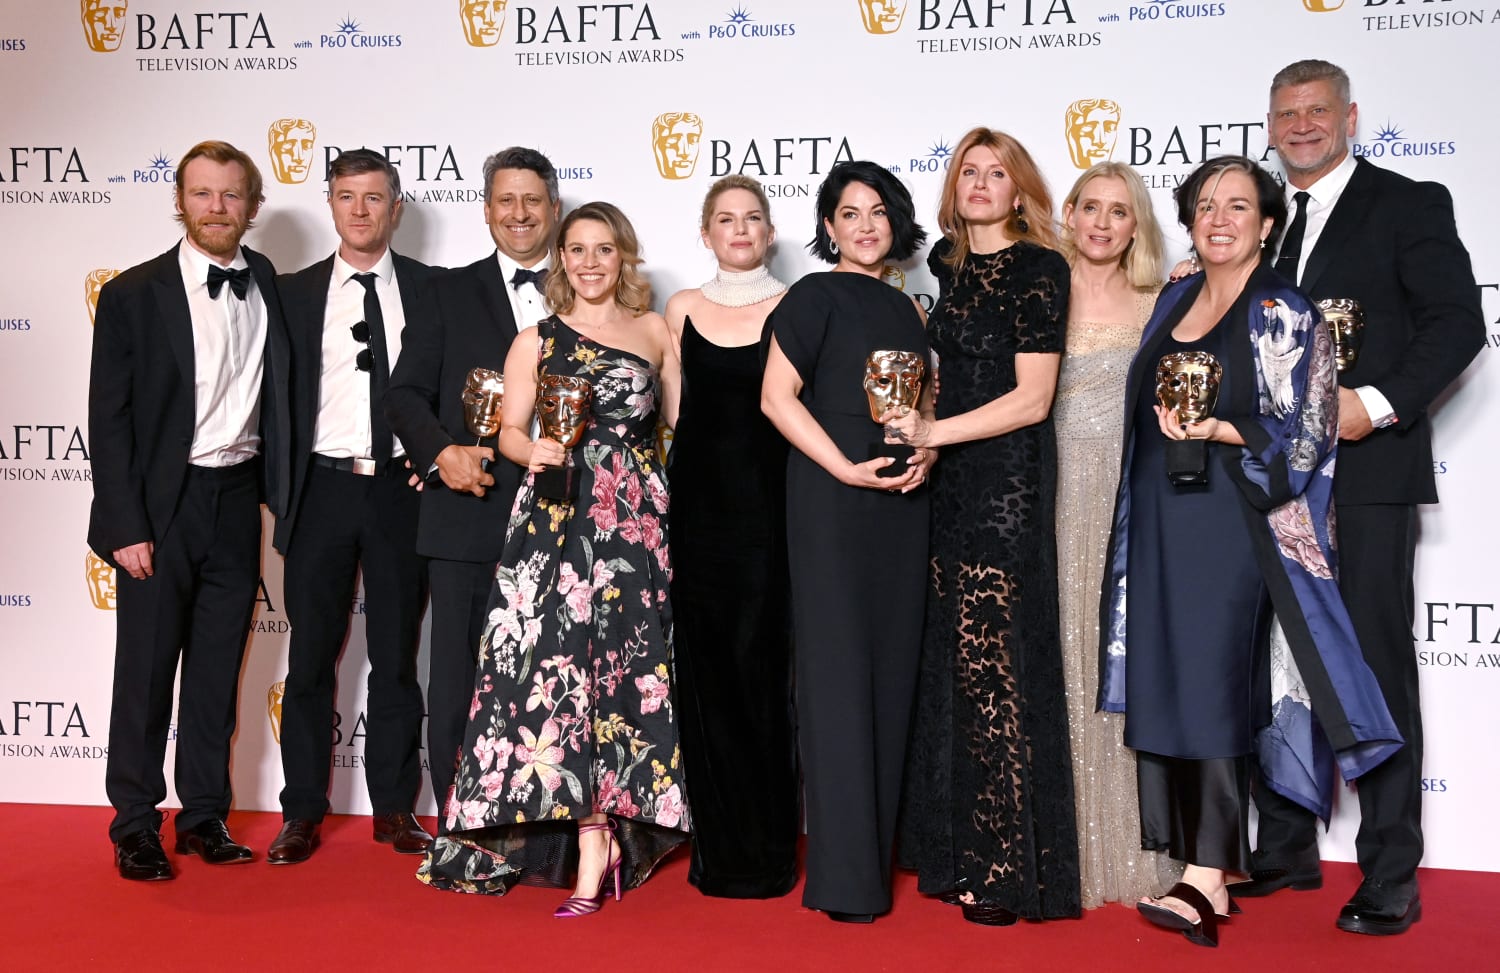 Watch the 2019 BAFTA Games Award ceremony here